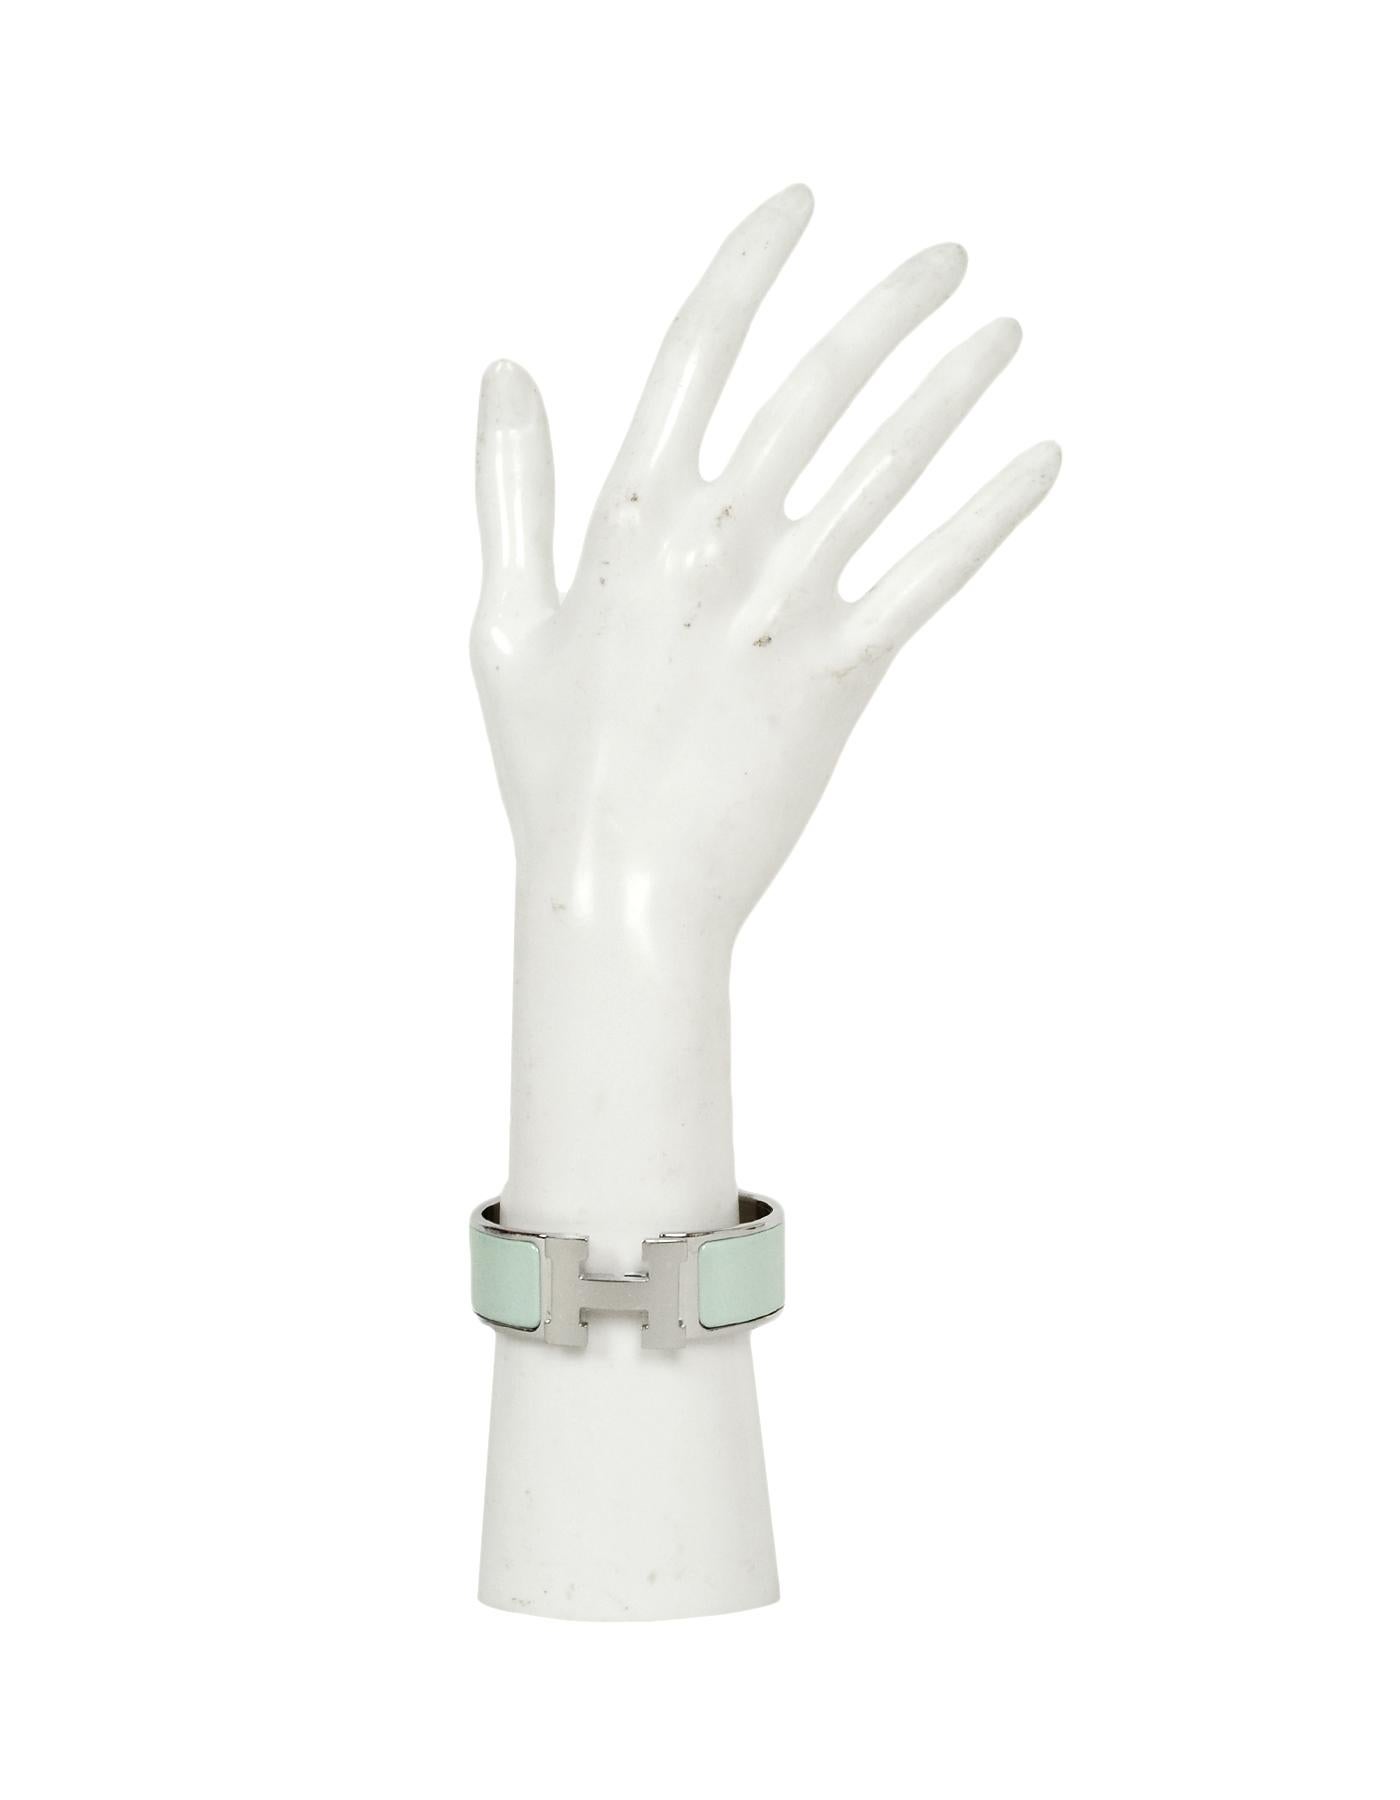 Hermes New Vert Argile/Palladium Wide Enamel H Clic Clac Bracelet
Color: Light blue and silvertone
Materials: Enamel, palladium plated metal
Closure/Opening: Swivel H
Overall Condition: Like new pre-owned condition.  Please note that this item has